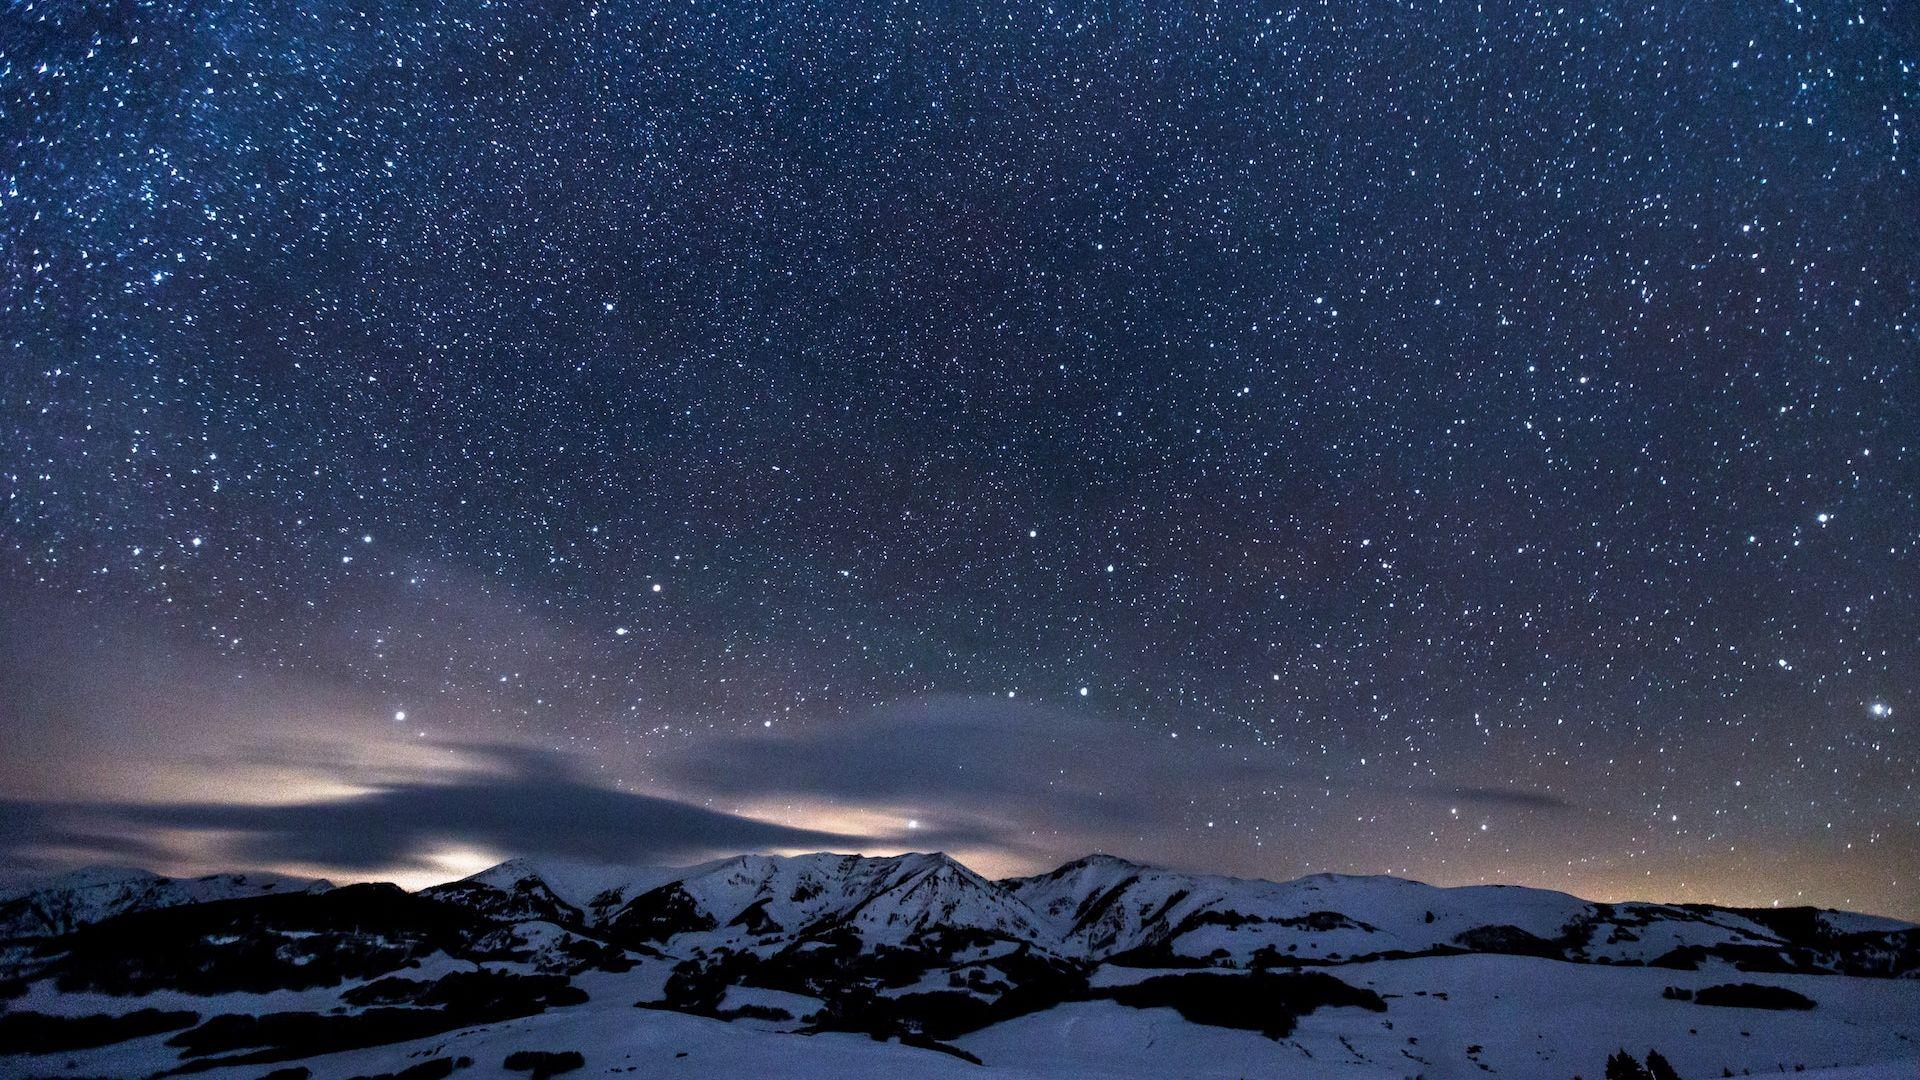 Star Sprinkled Snowy Mountains Wallpaper